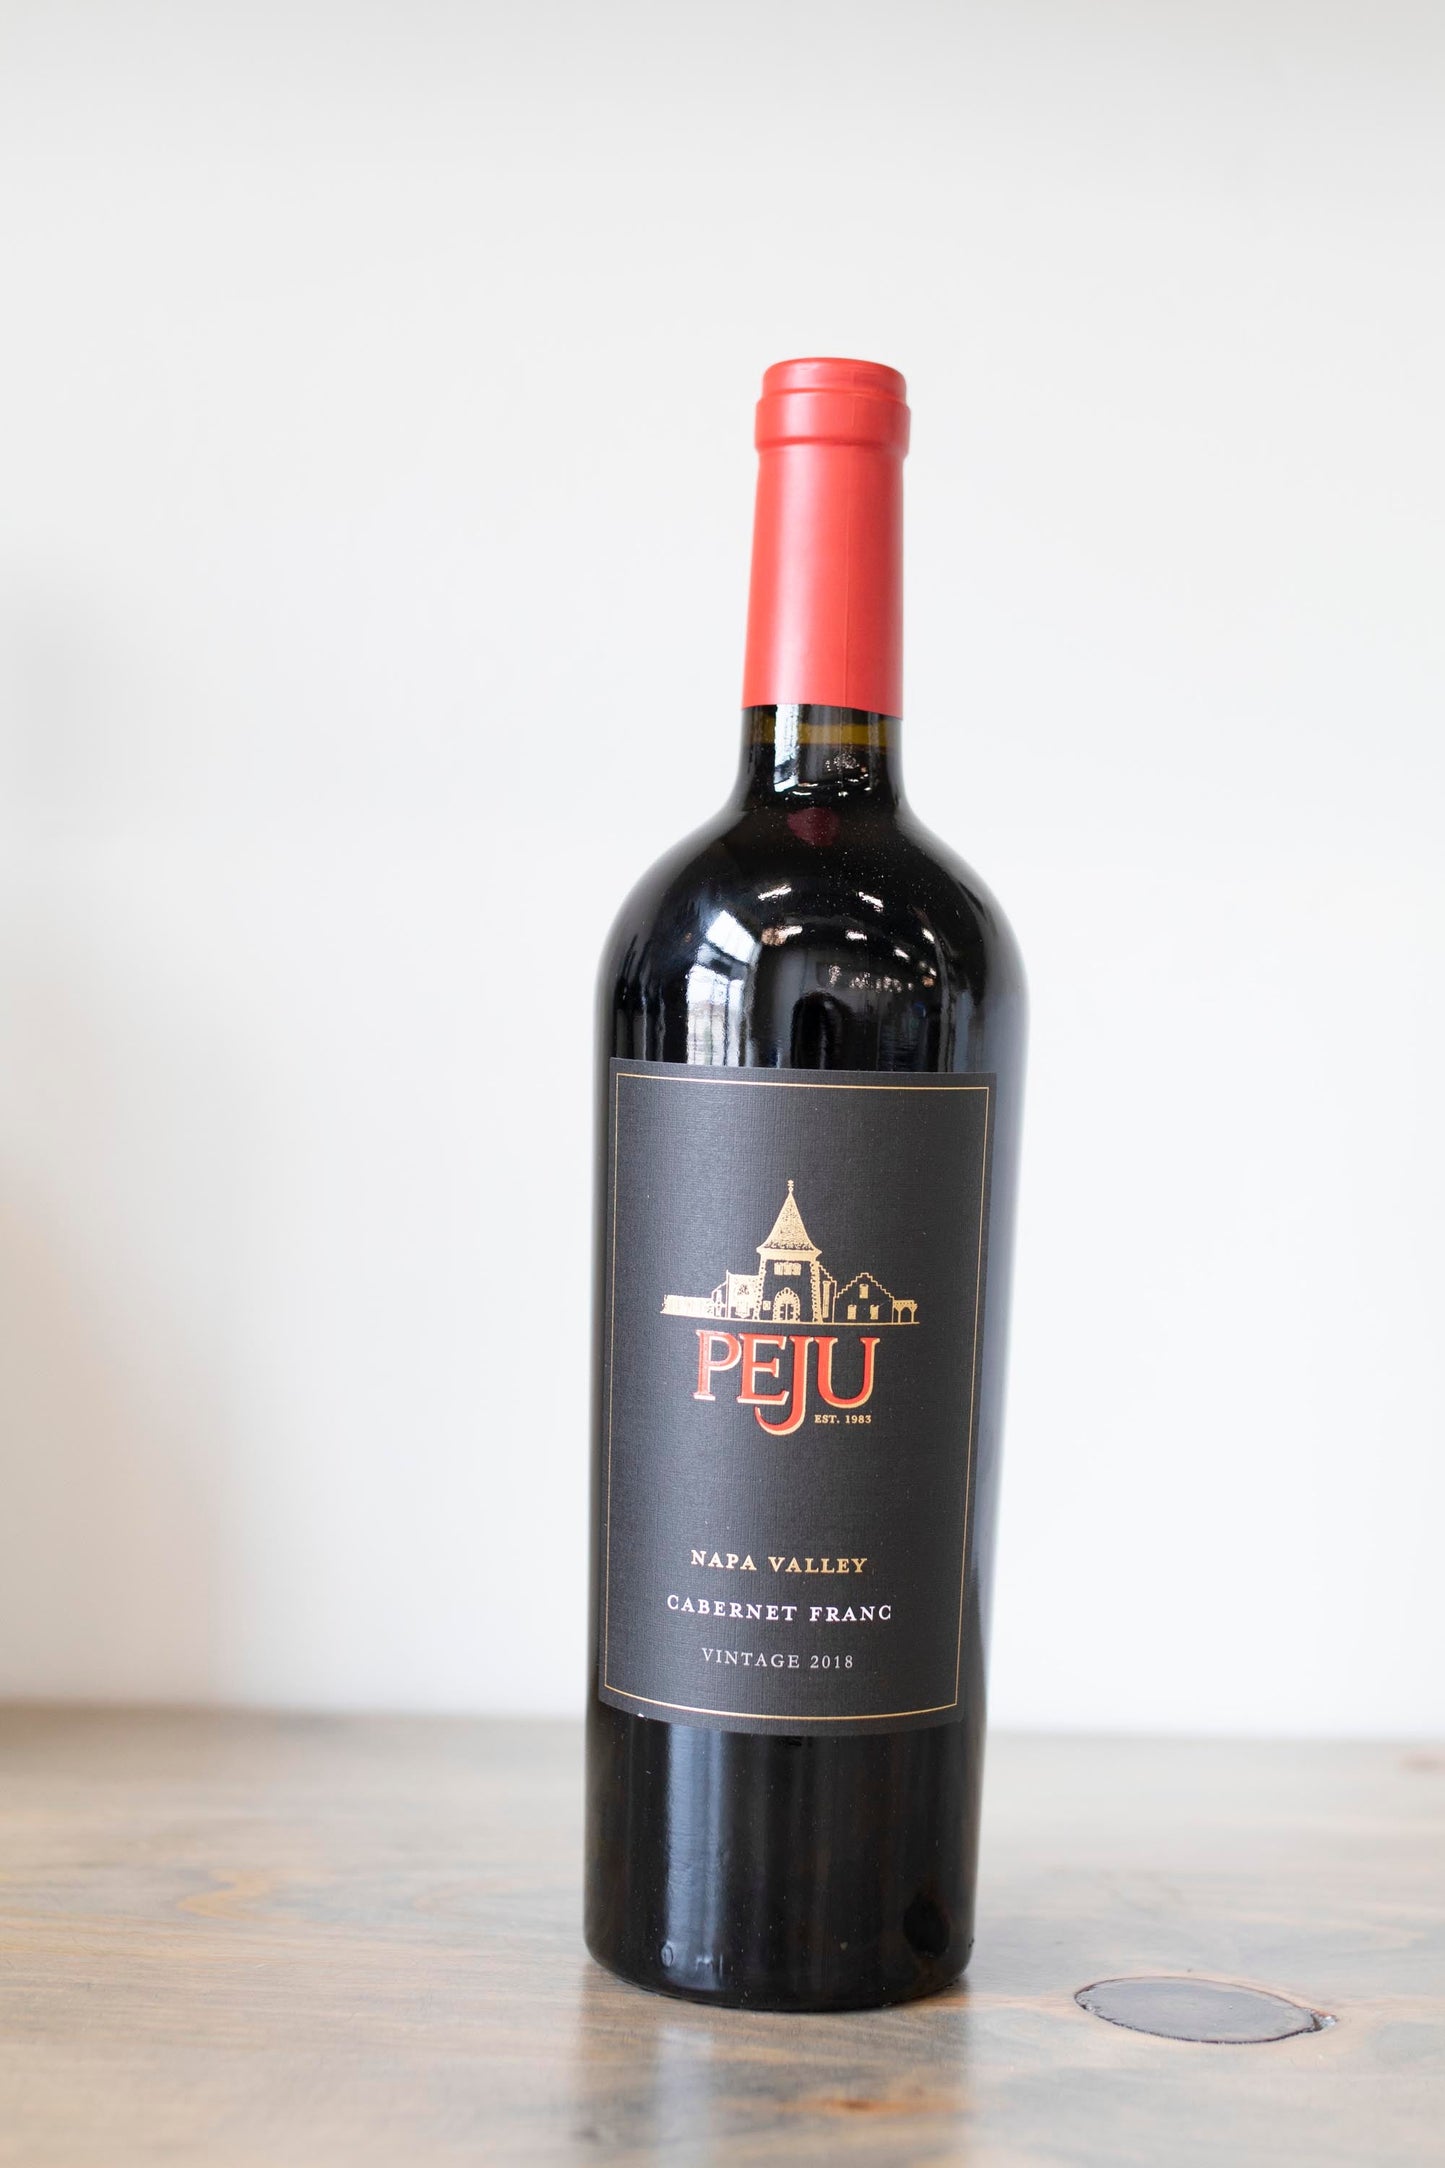 Bottle of Peju cab franc found at Vine & Board in 3809 NW 166th St Suite 1, Edmond, OK 73012